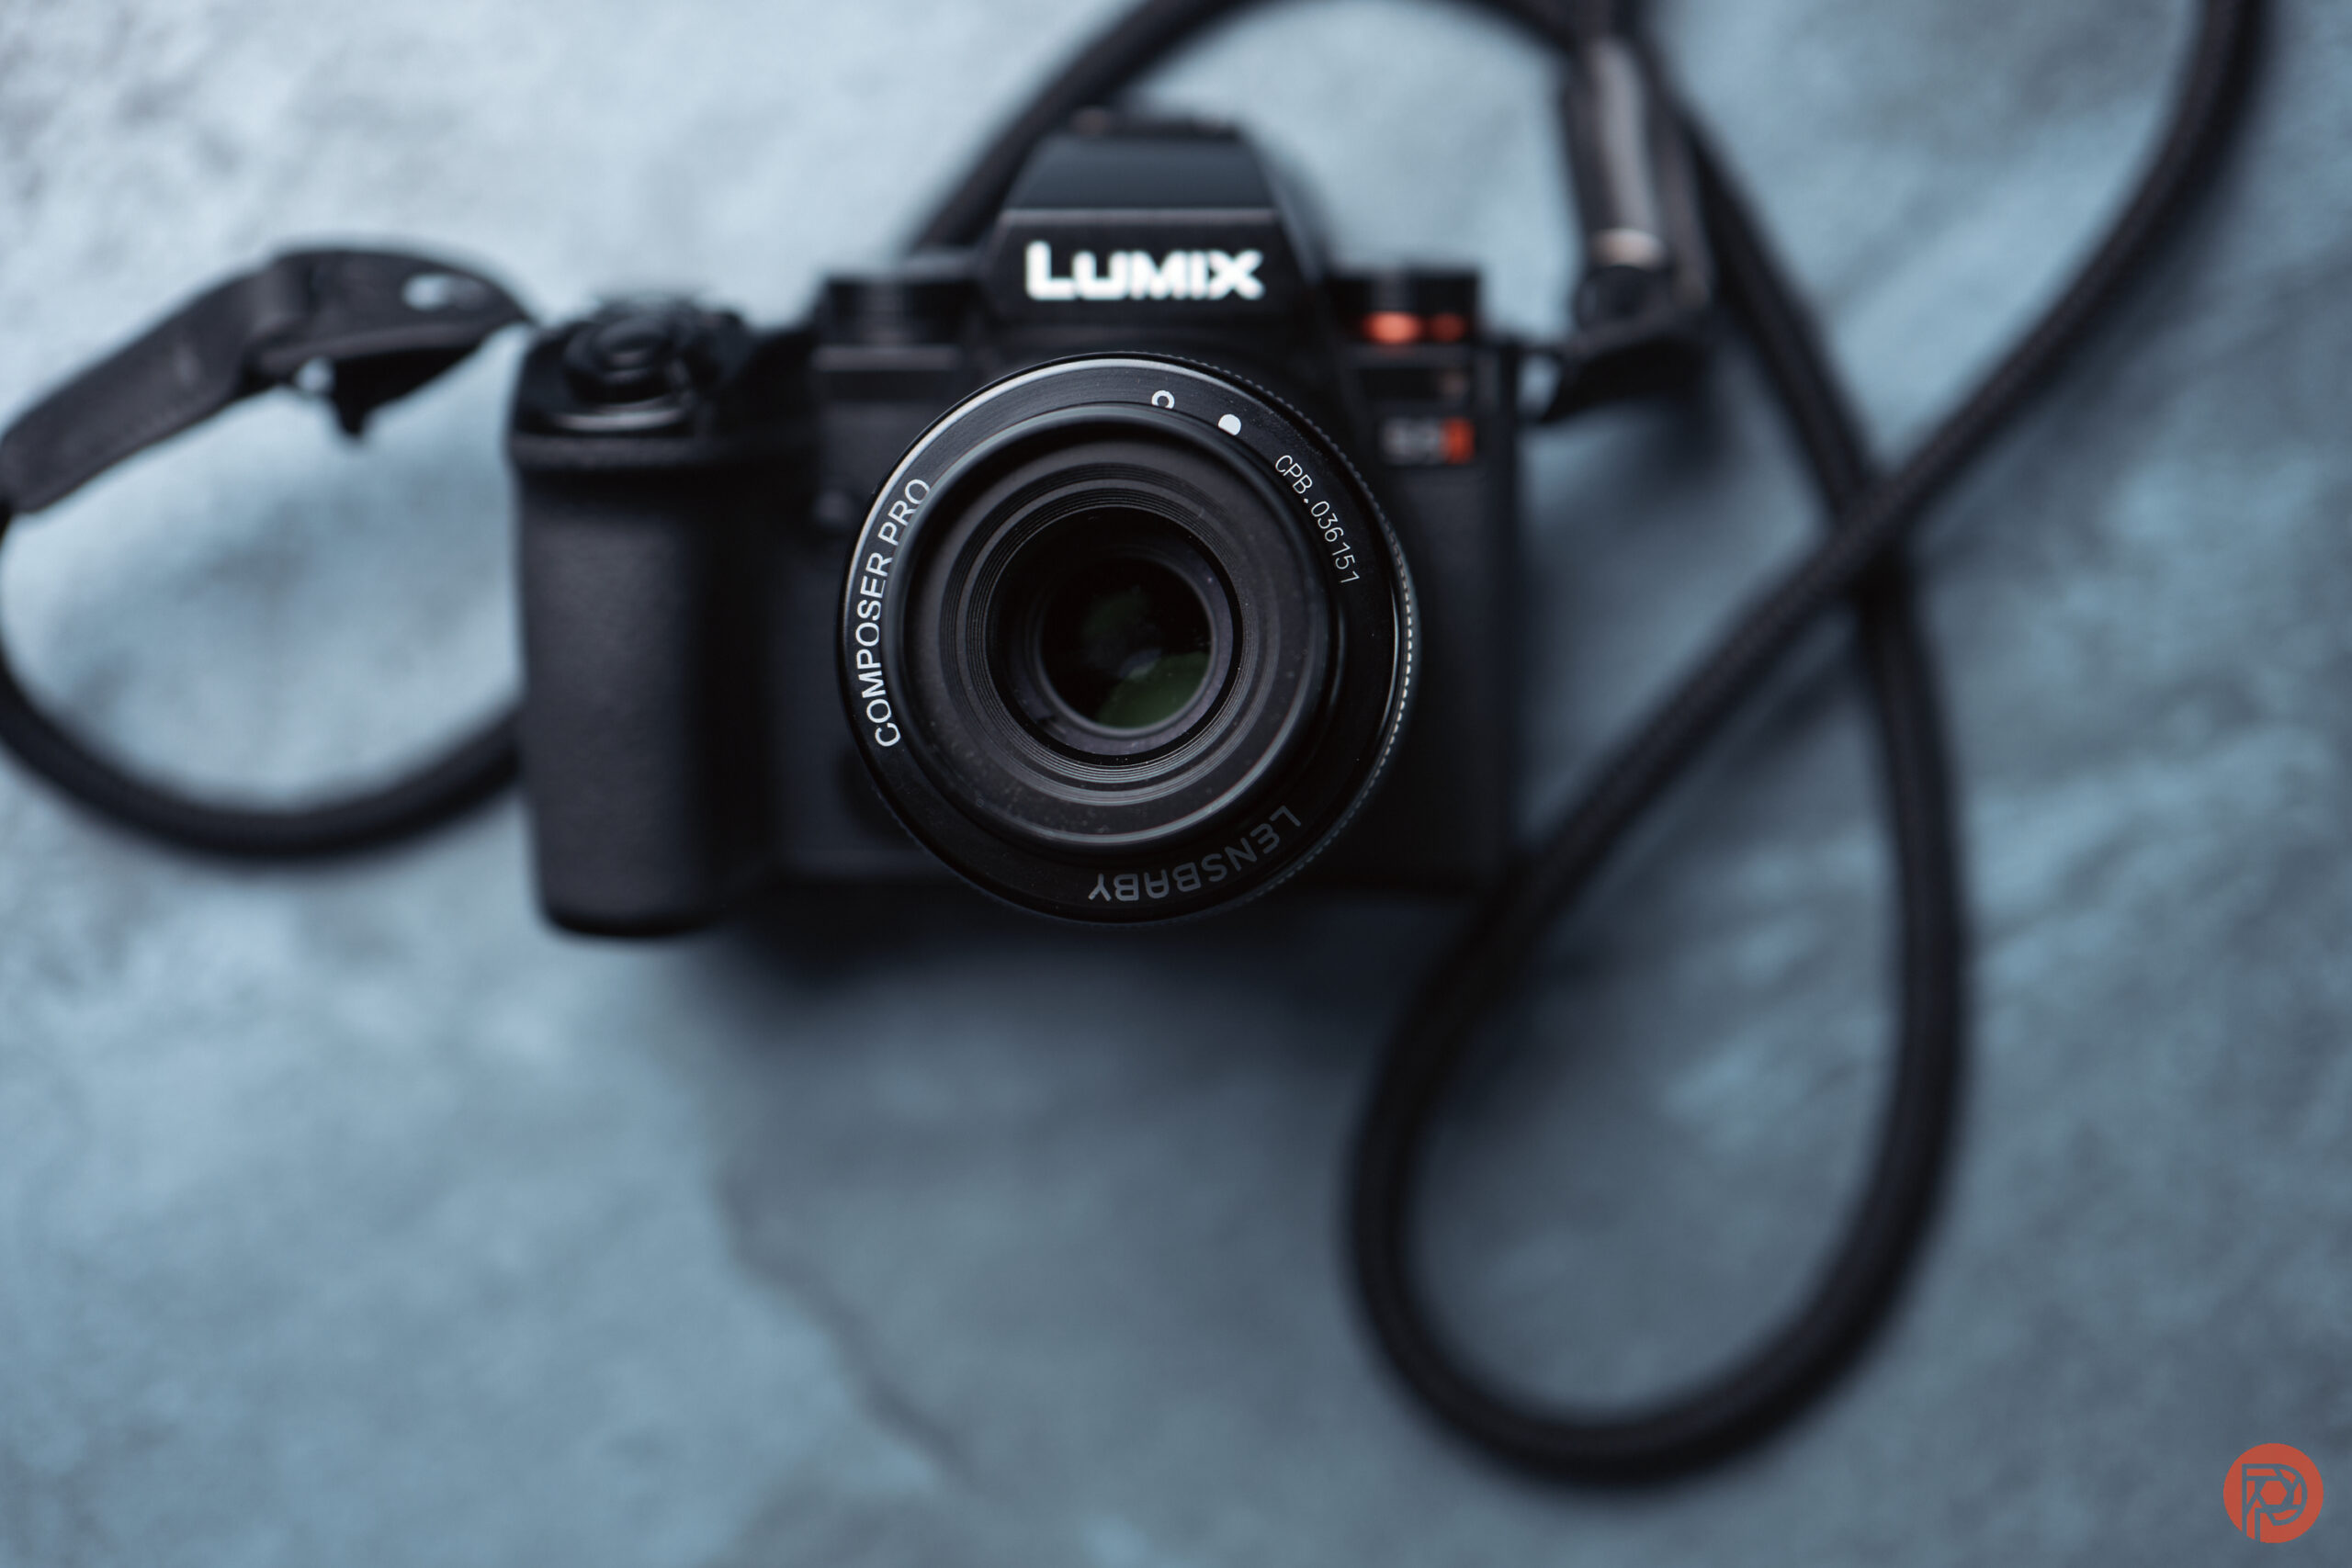 Chris Gampat The Phoblographer Lensbaby Double Optic II review product images 1.81-250s400 1